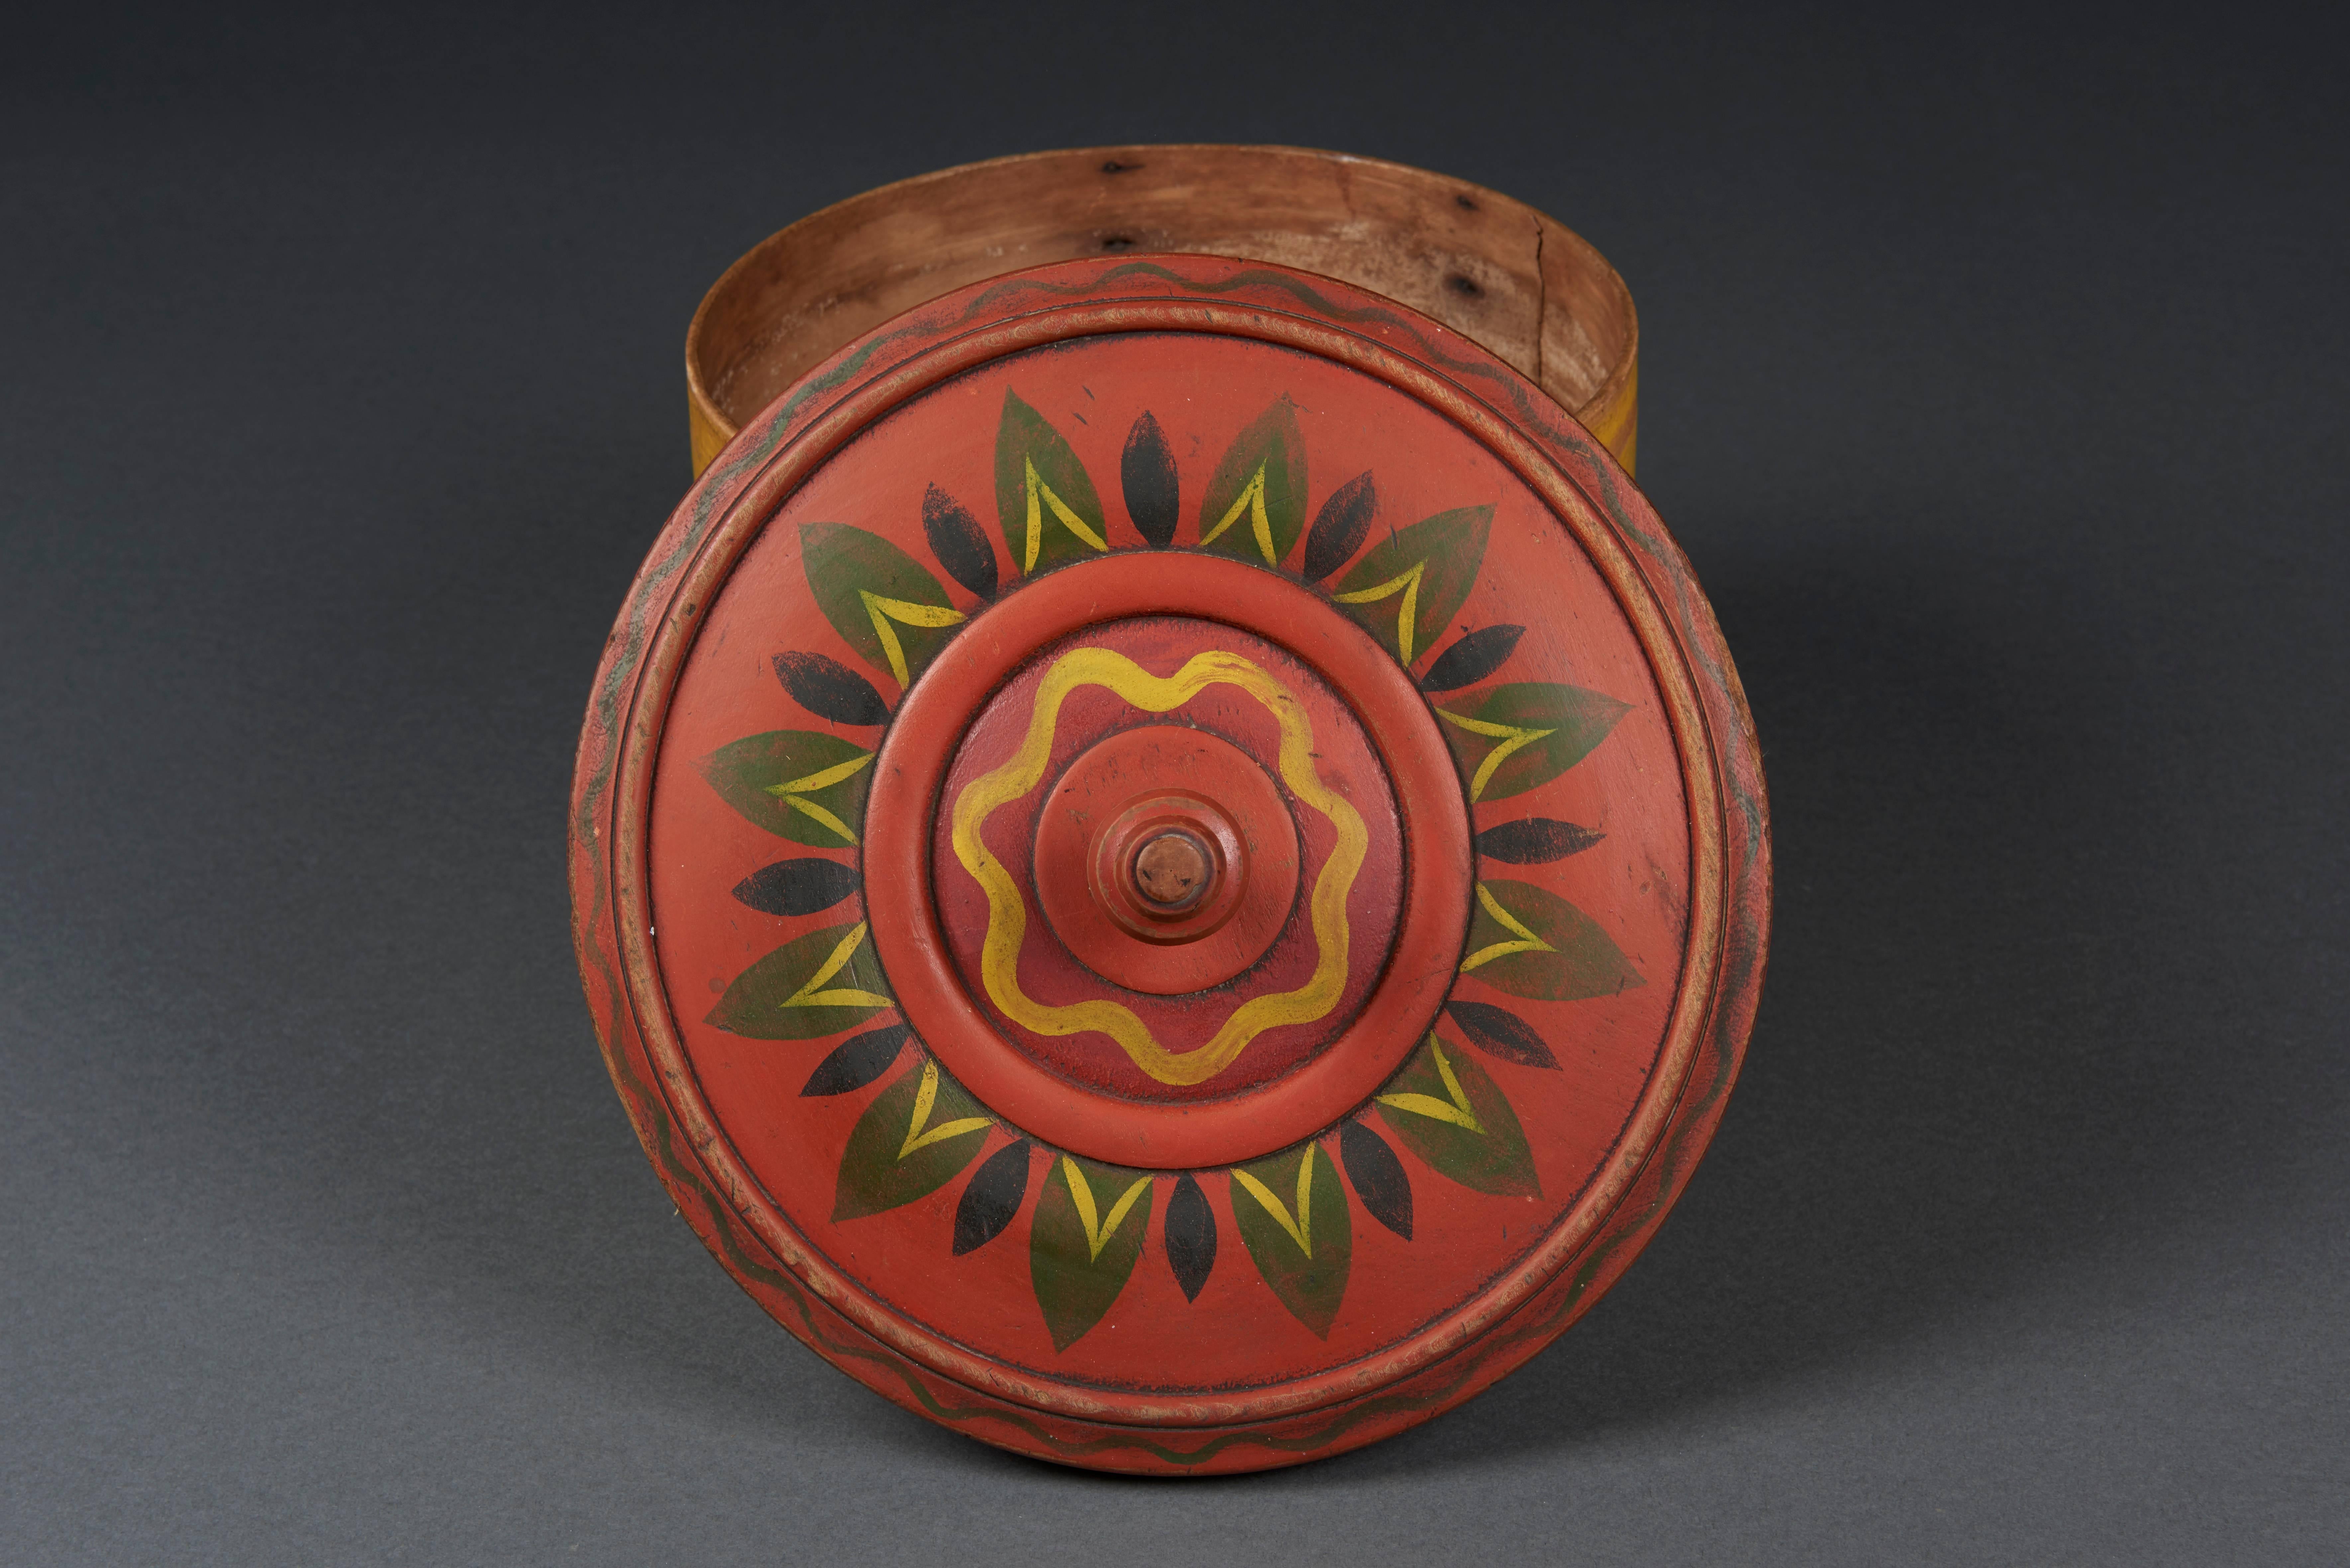 This paint decorated donut box is an excellent example of Pennsylvania-German decorative art with outstanding paint and carved elements. All original paint decoration in bright colors on a very regional form. Made between 1820 and 1830. A statement